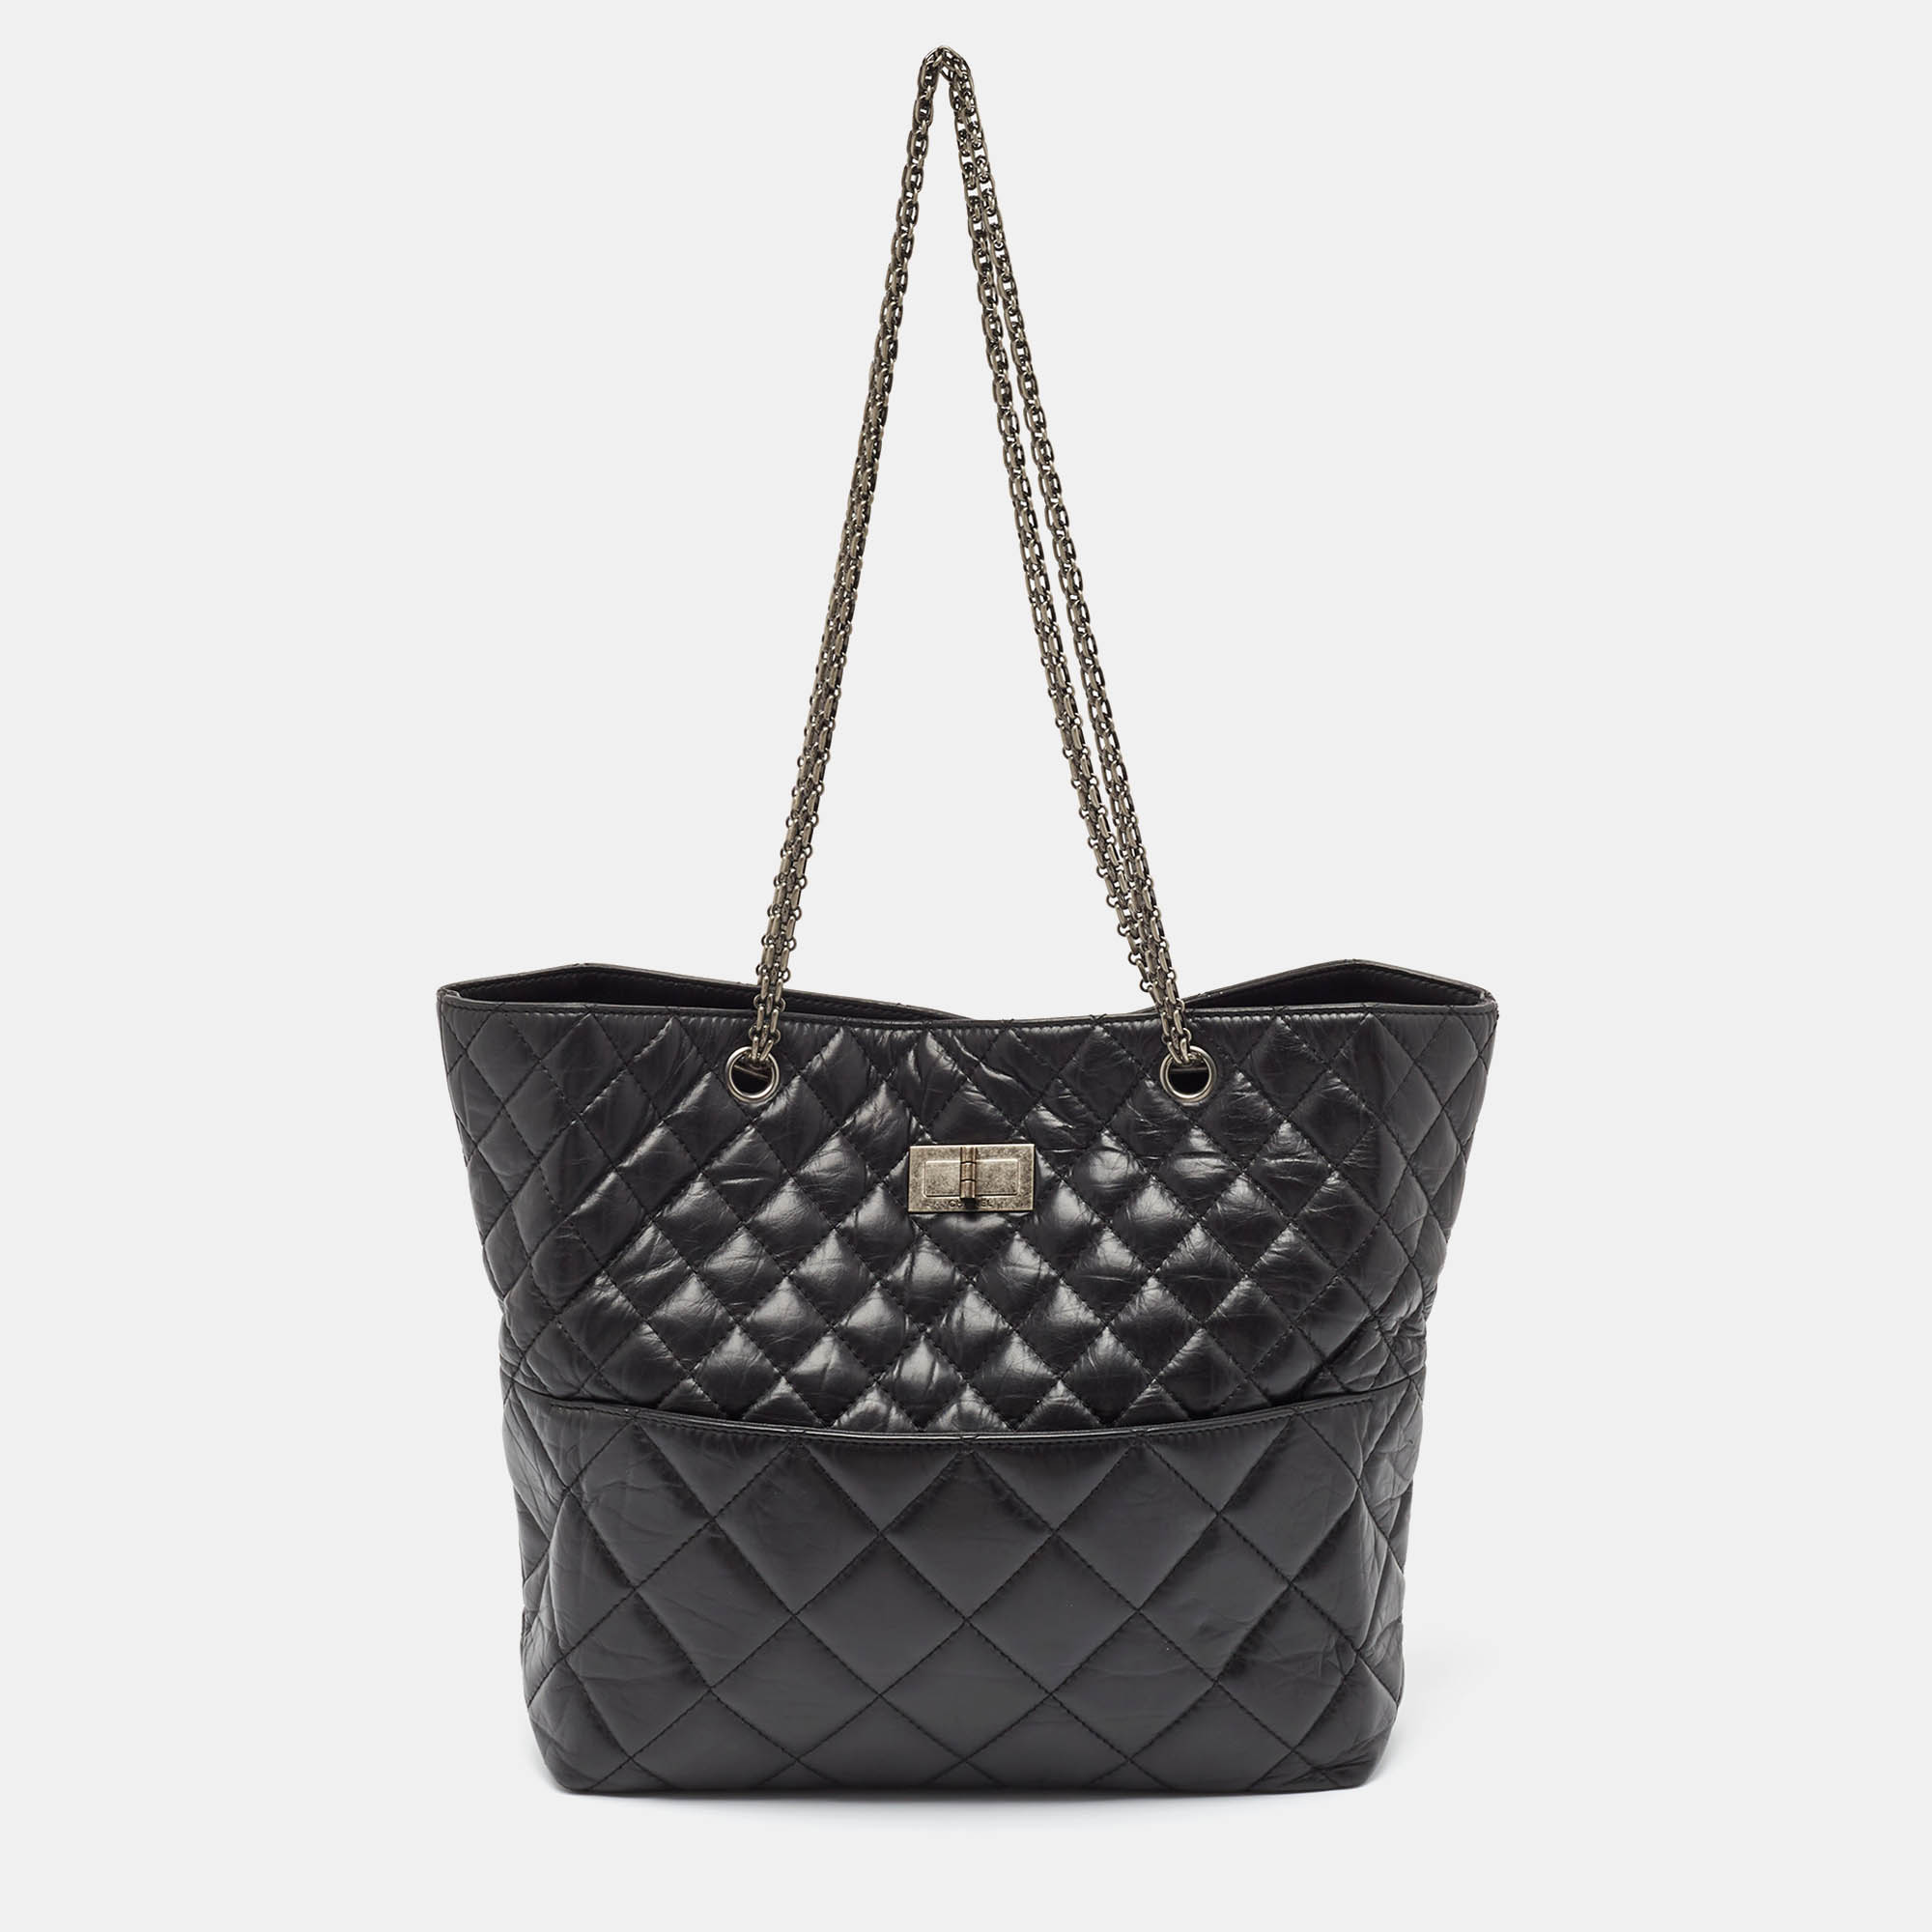 

Chanel Black Quilted Aged Leather Reissue East West Tote